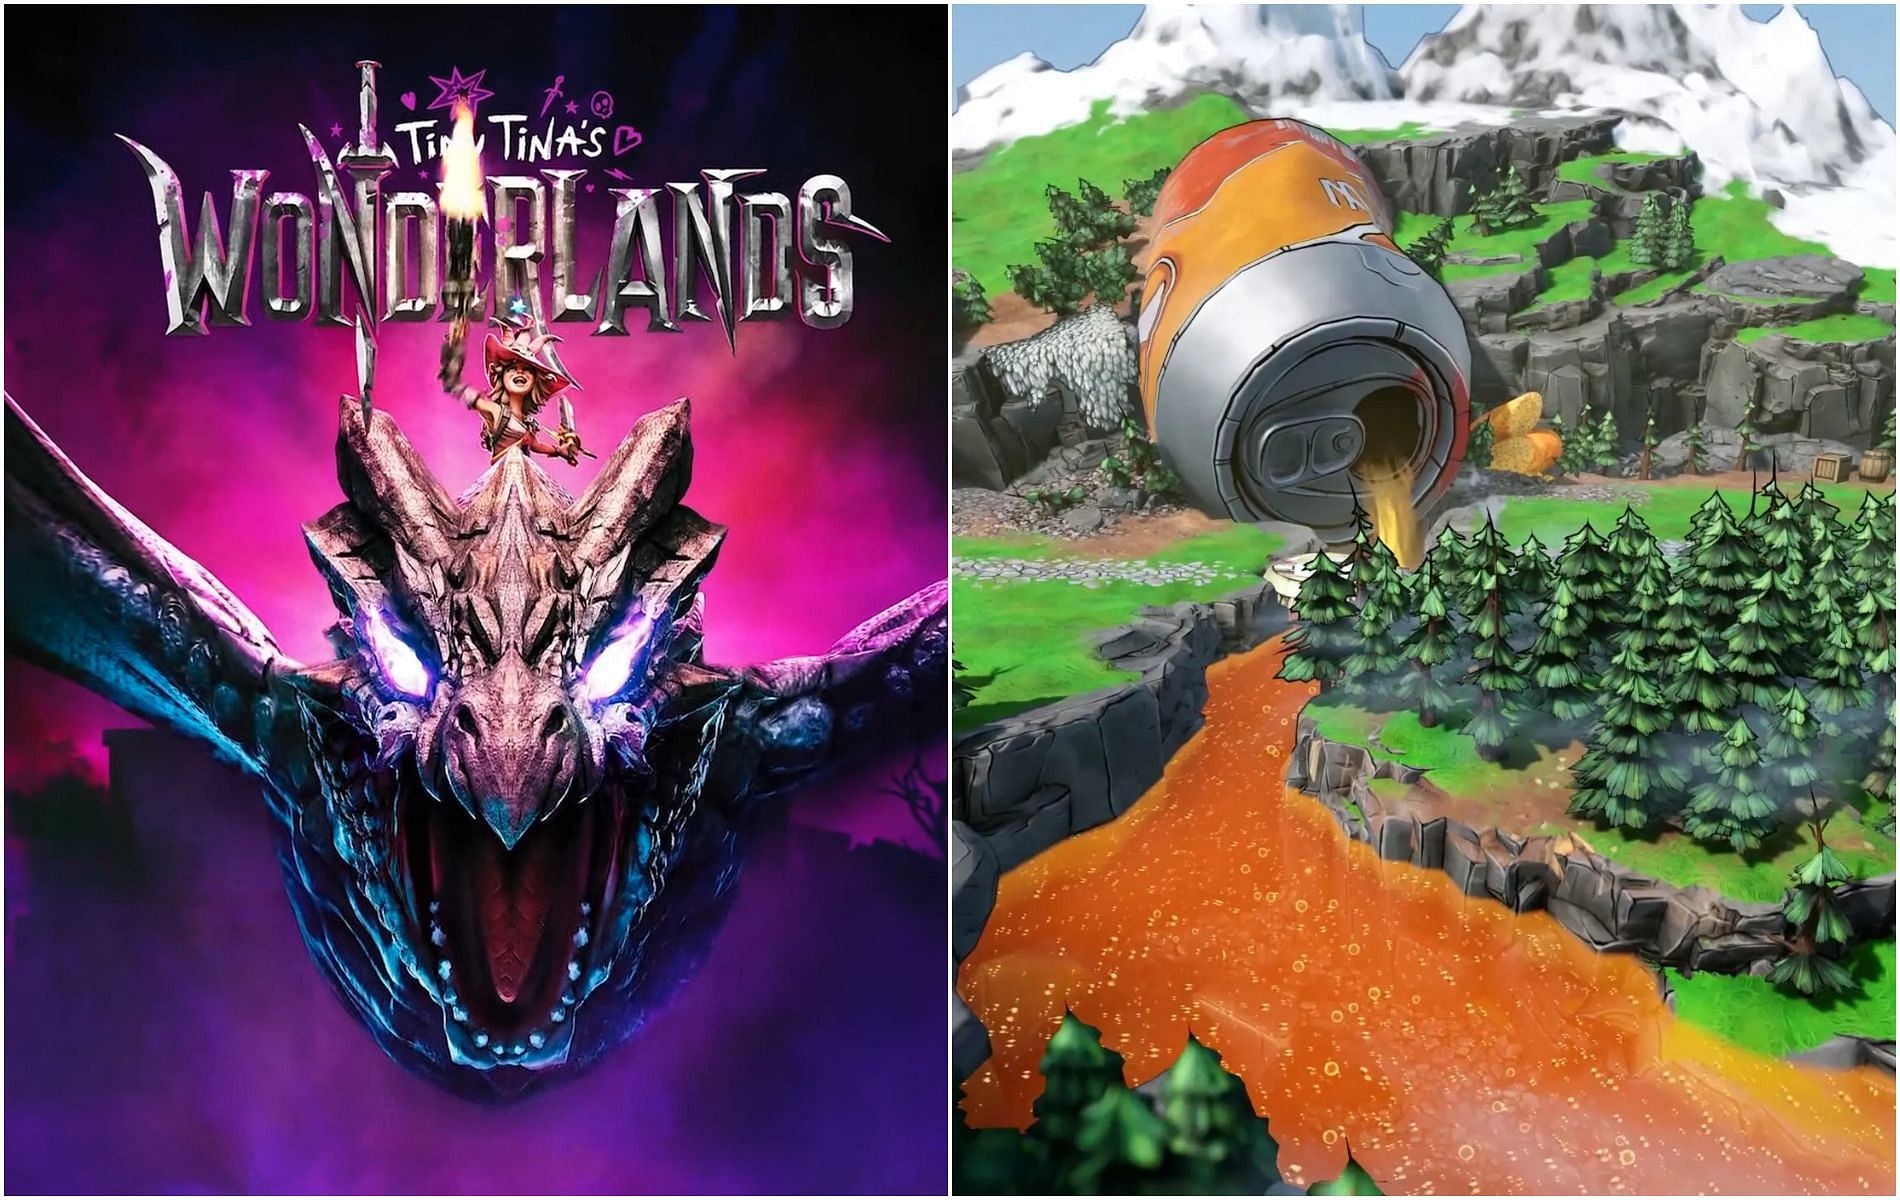 The world of Wonderlands is teeming with discoveries to be made (Images via Gearbox Software)